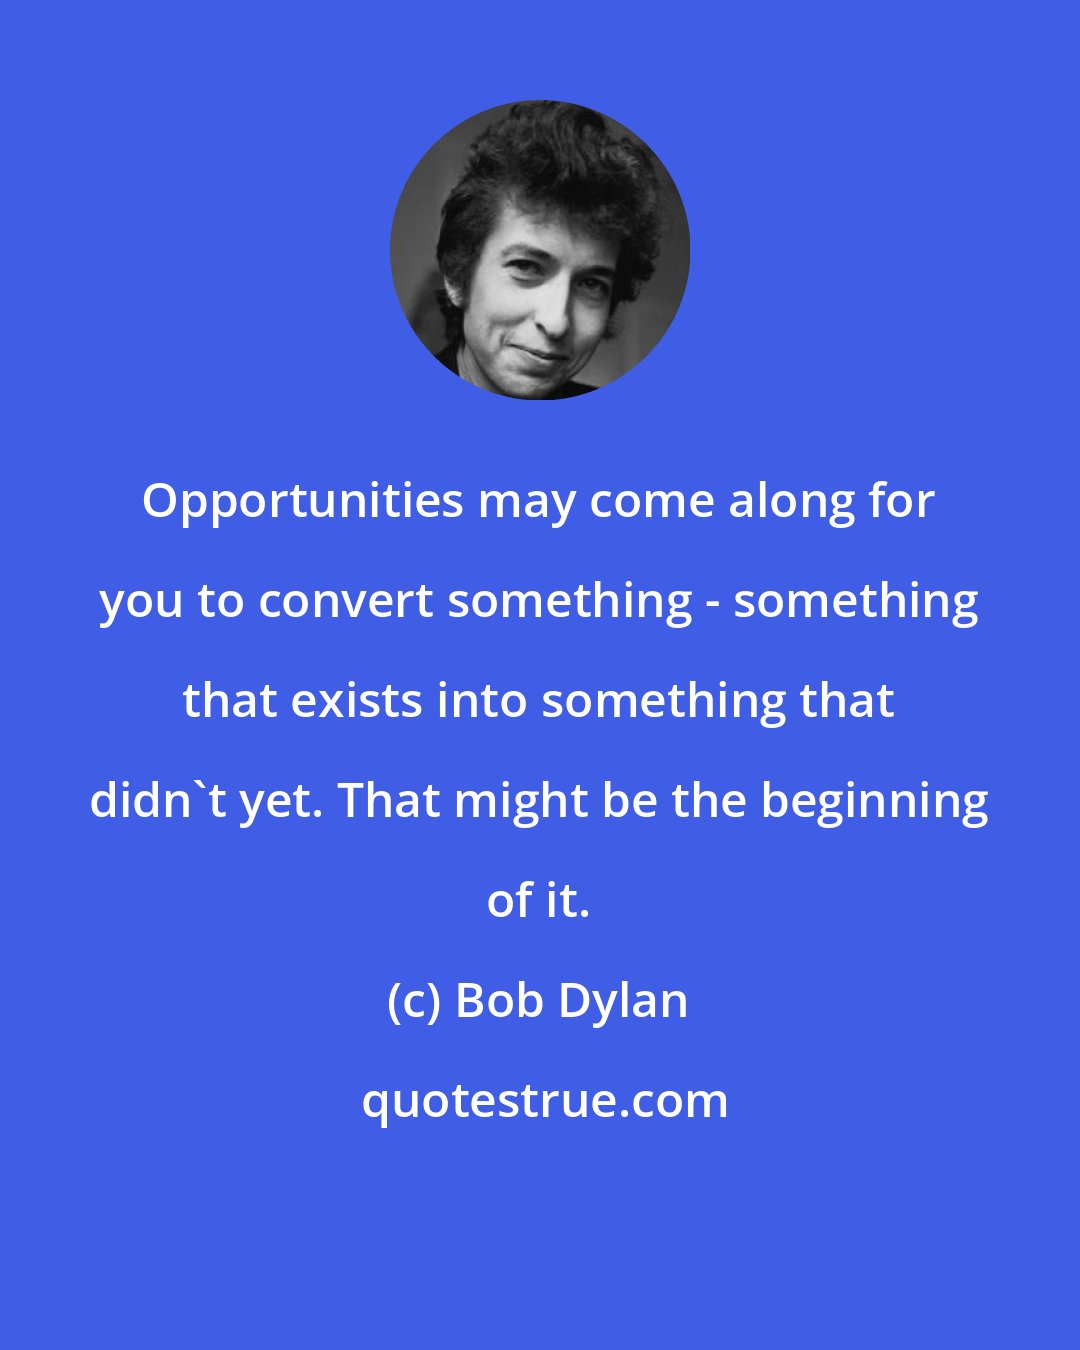 Bob Dylan: Opportunities may come along for you to convert something - something that exists into something that didn't yet. That might be the beginning of it.